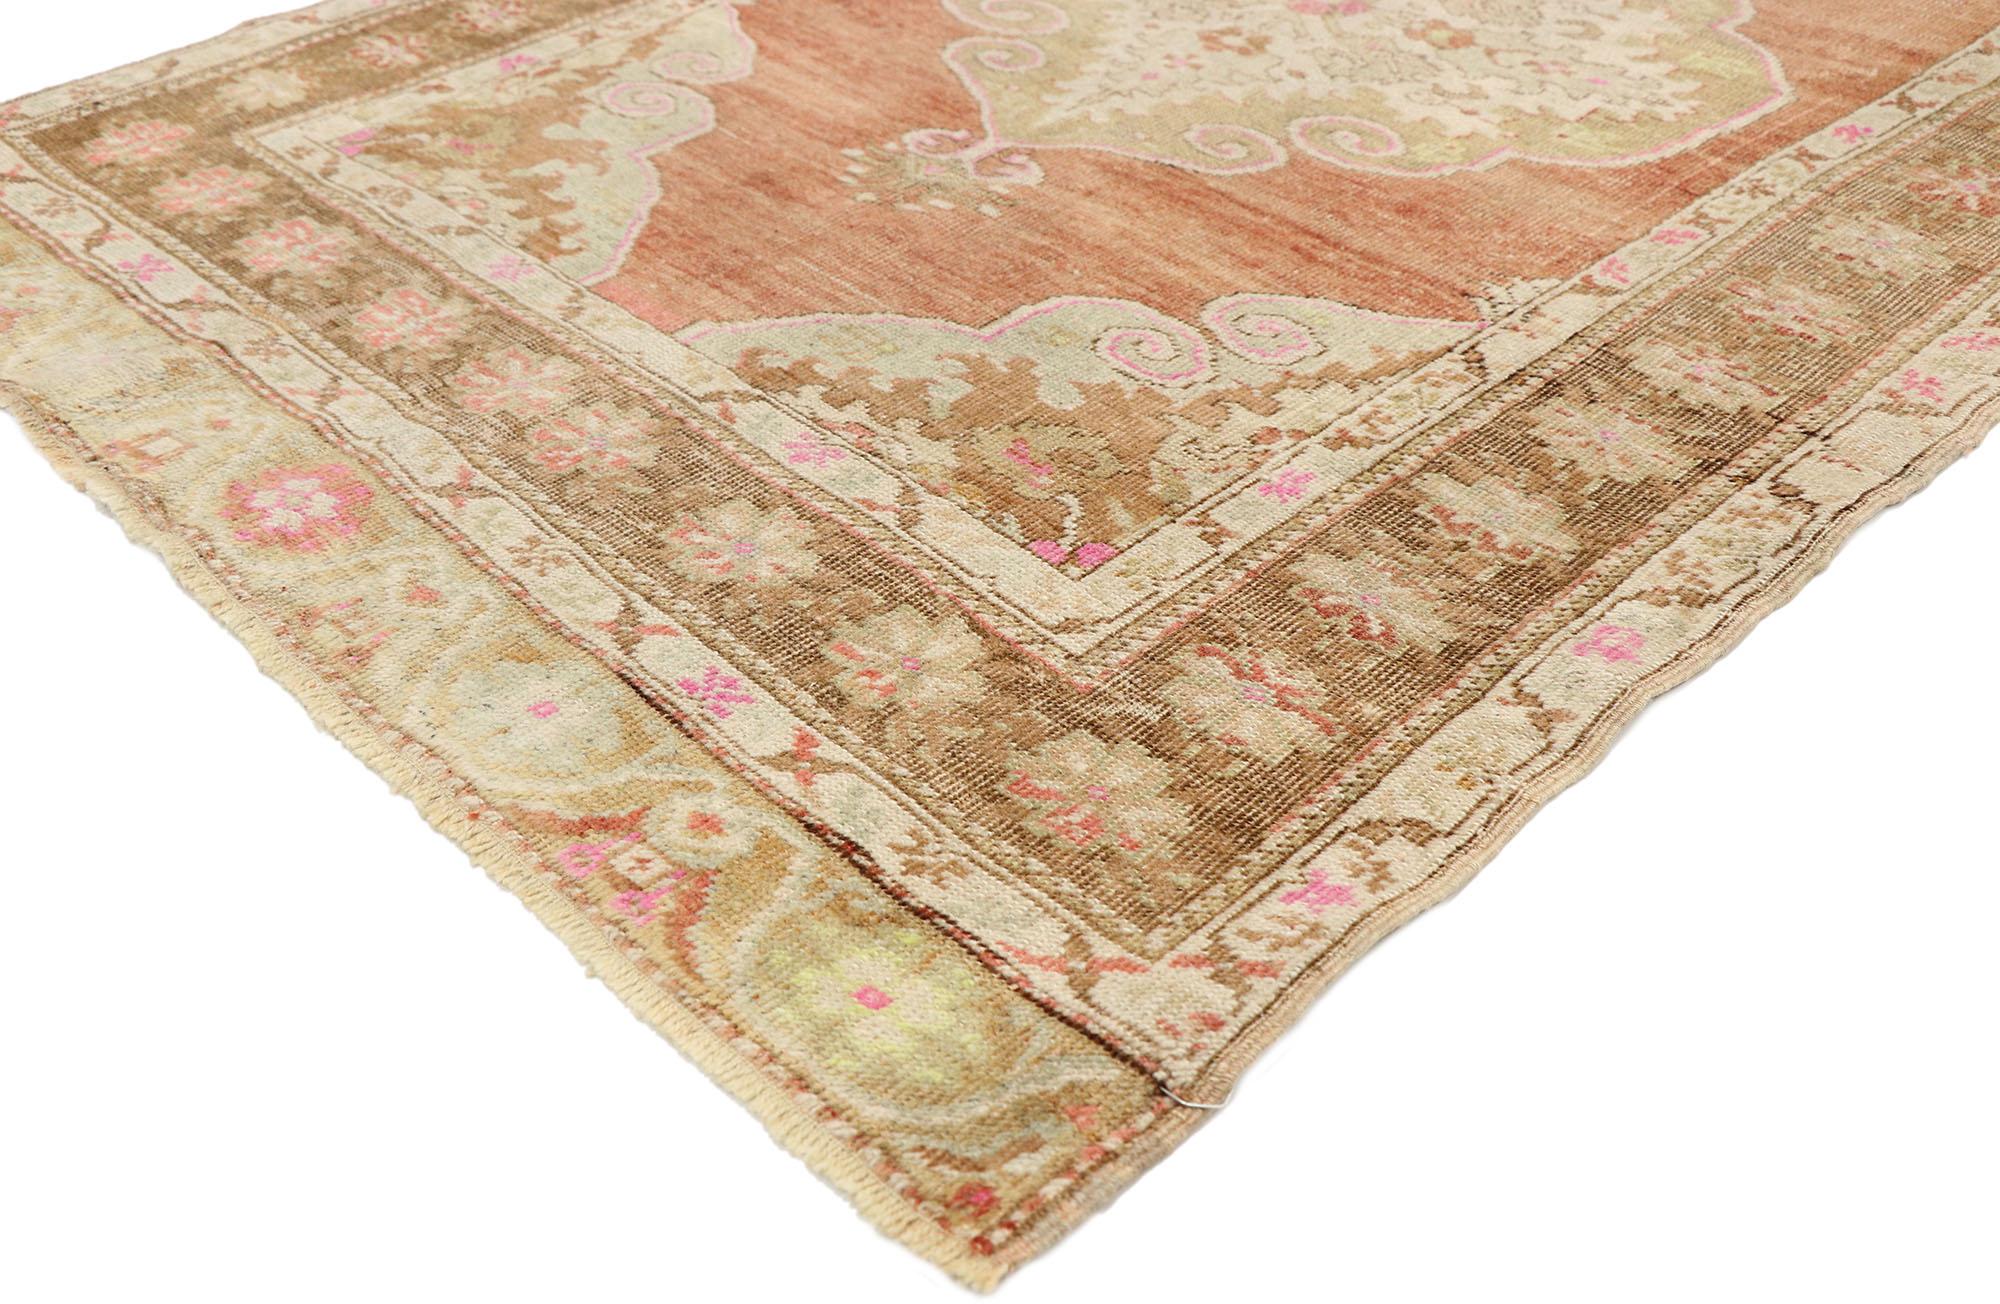 52979, vintage Turkish Oushak runner with Rustic Belgian style. With its understated elegance and rustic sensibility, this hand knotted wool vintage Turkish Oushak runner astounds with its beauty. The abrashed field features three botanical